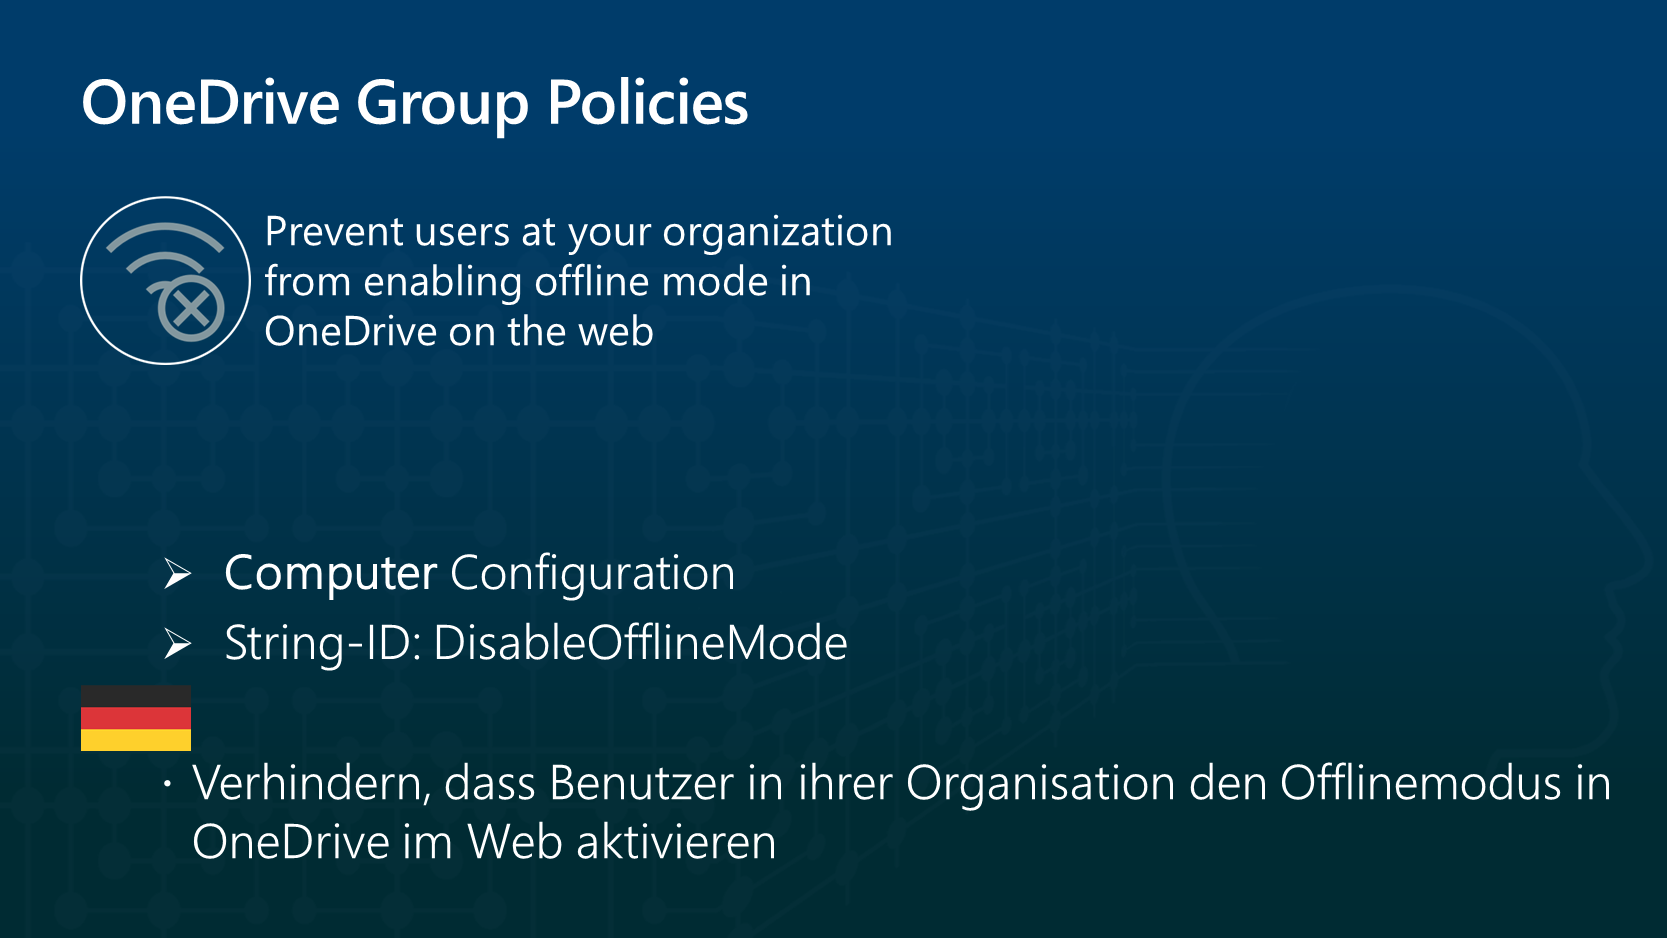 The image shows the group policy “Prevent users at your organization from enabling offline mode in OneDrive on the web” in the computer configuration with the string ID DisableOfflineMode.